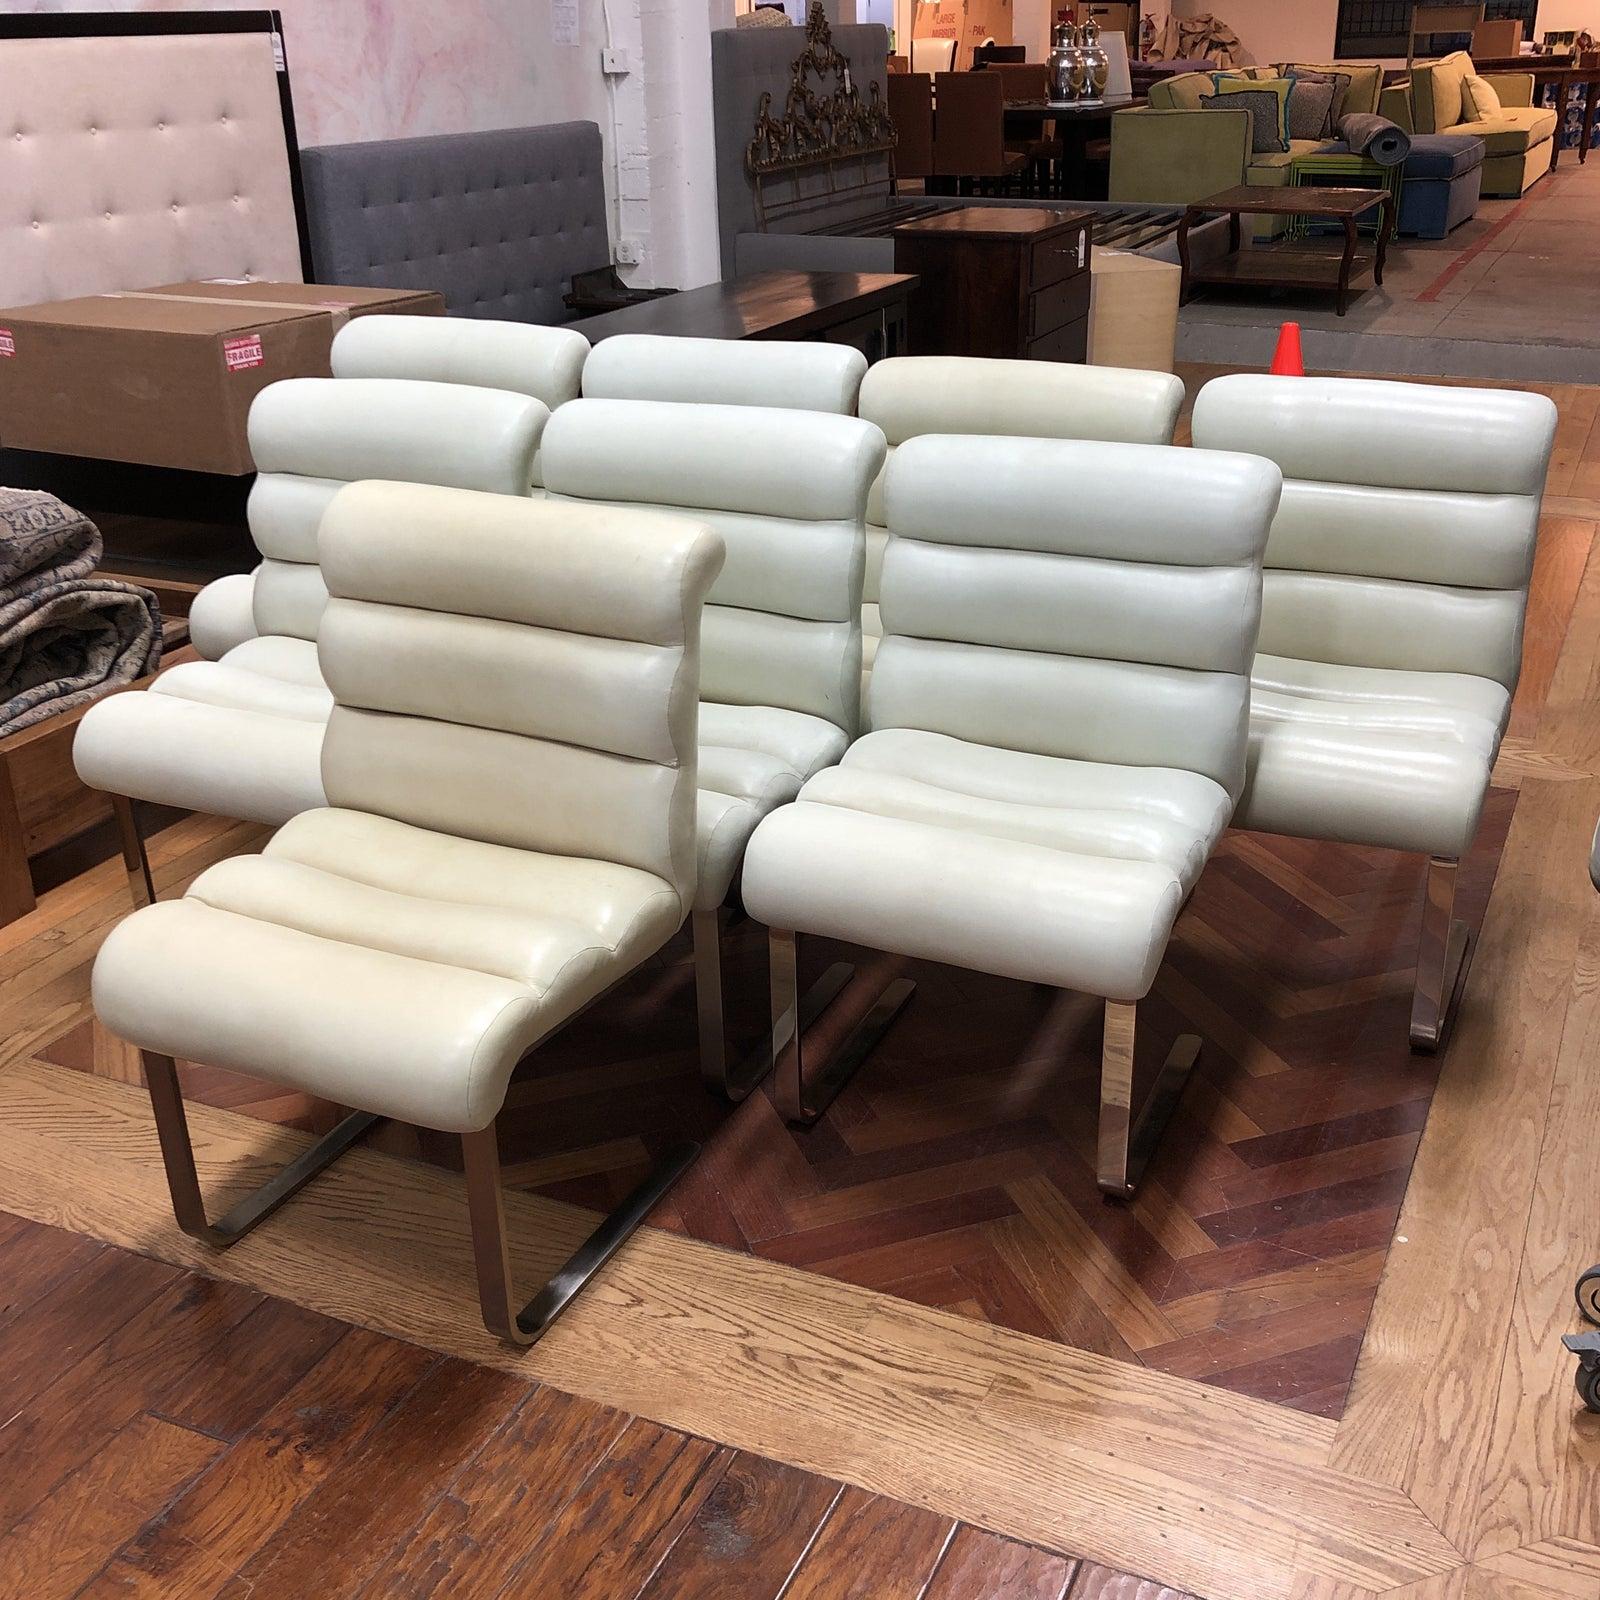 Design plus gallery presents set of eight Laguna Cantilever dining chairs. Designed by Frank Mariani for Pace Industries, the set is incredibly comfortable while remaining oh so mod. The chairs retain their original creamy bonded leather with some